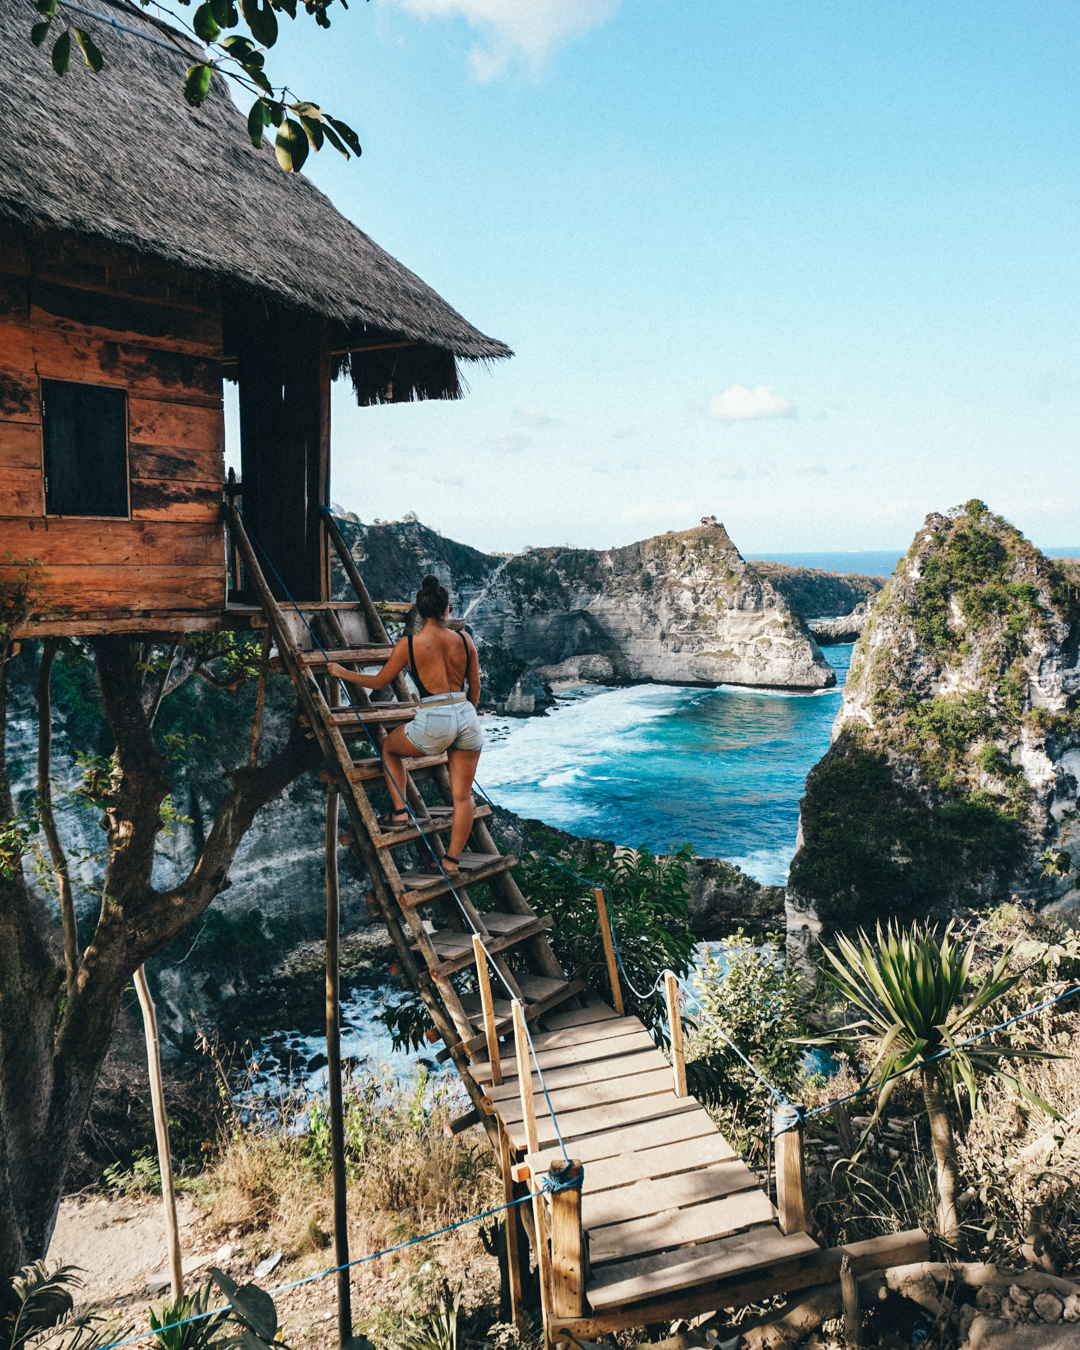 5 WAYS TO TRAVEL LONGTERM WITHOUT BEING RICH